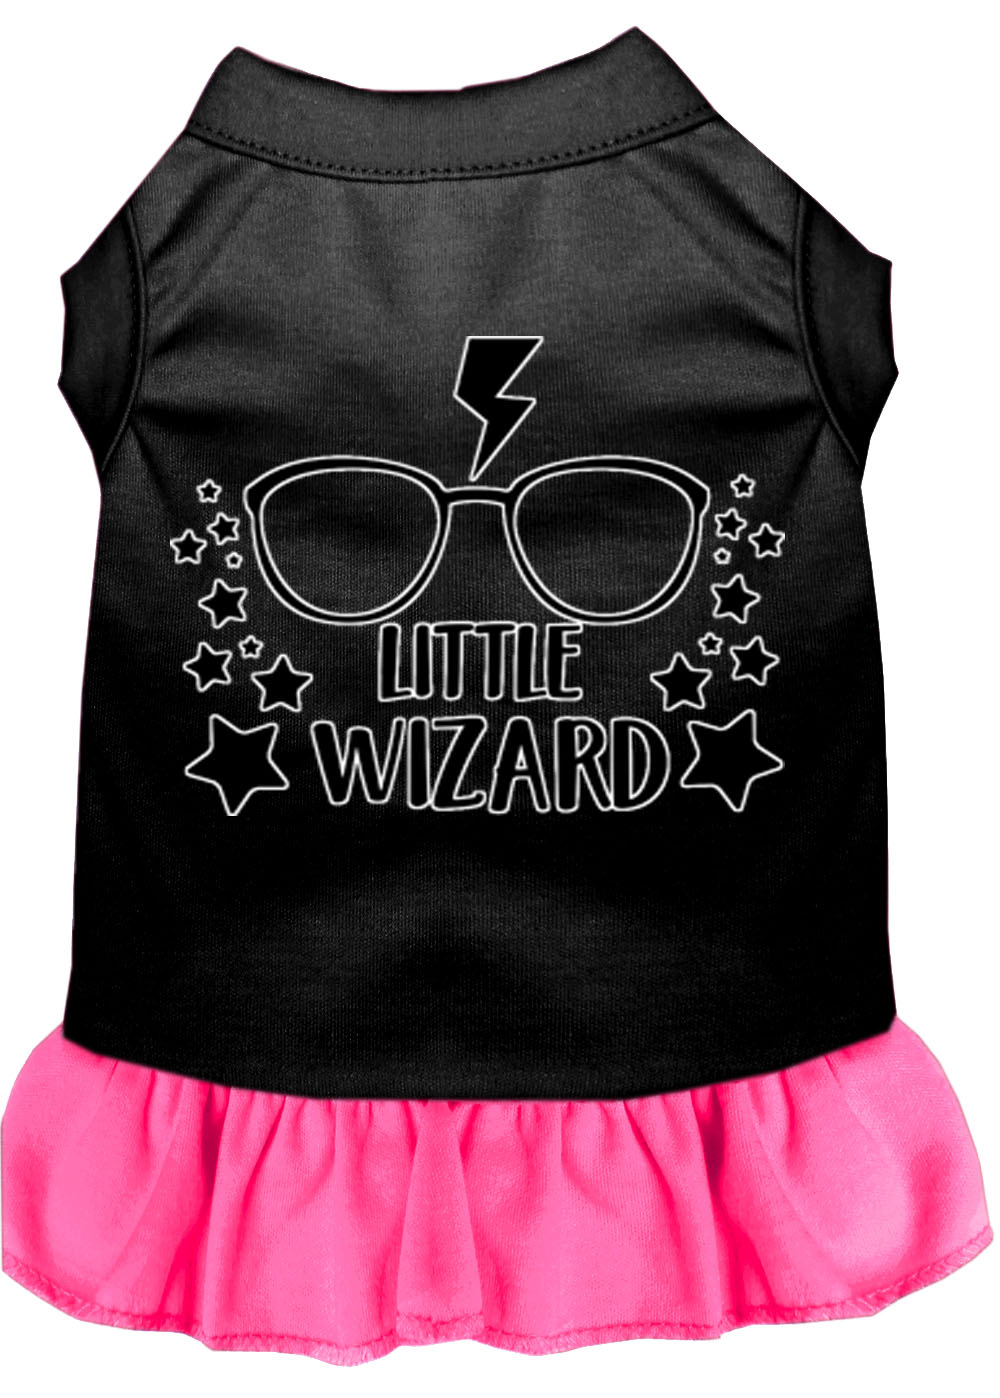 Little Wizard Screen Print Dog Dress Black with Bright Pink Lg